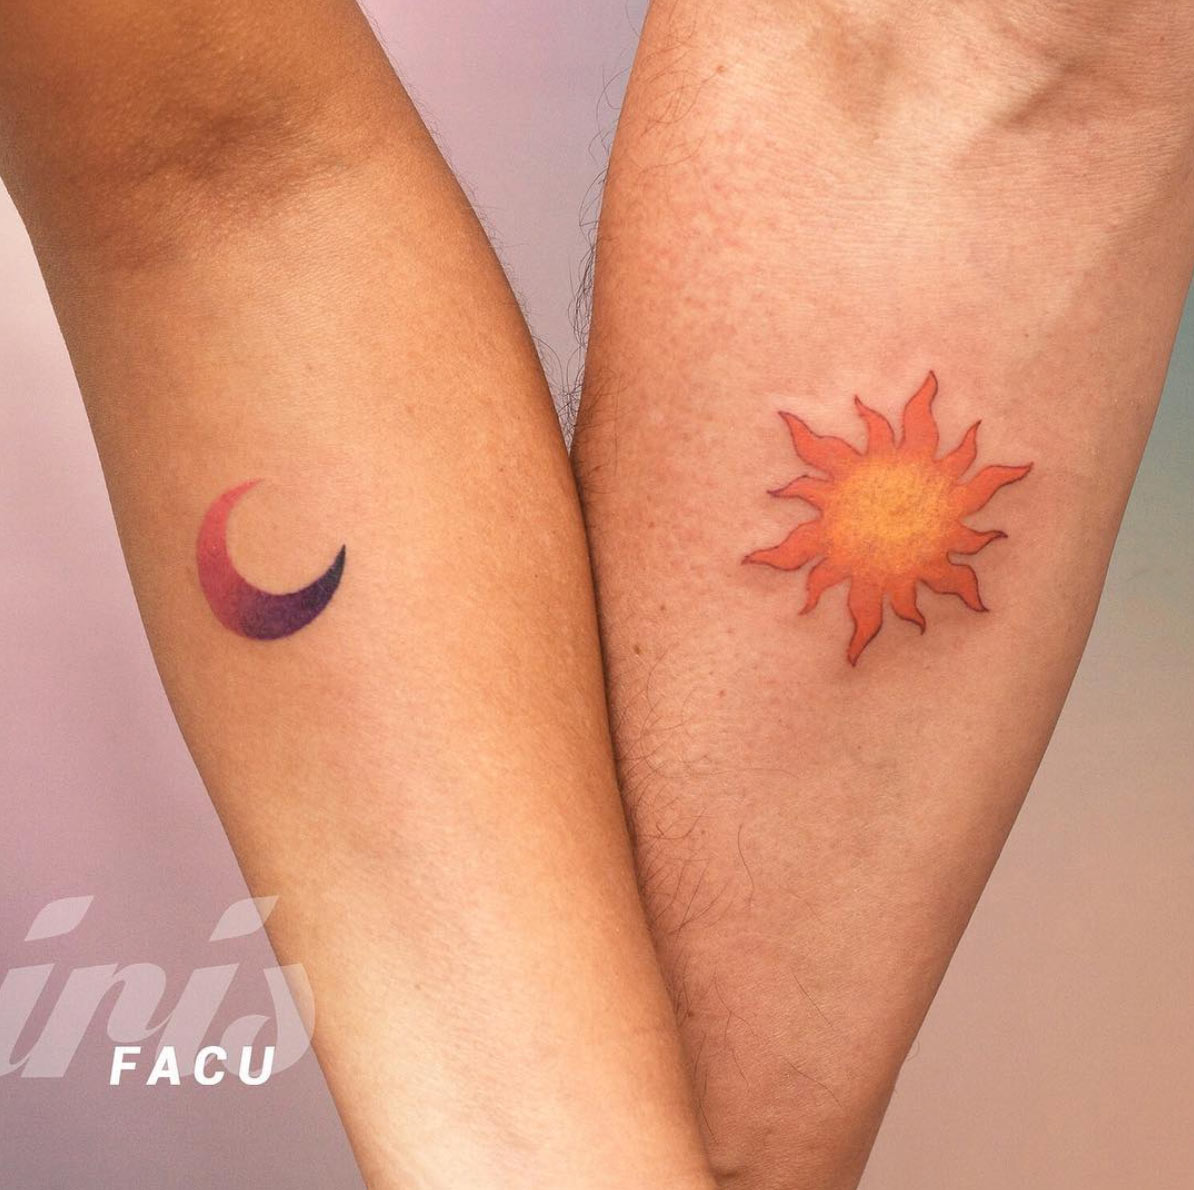 40 Matching Tattoos Every Couple Can Get Behind - TattooBlend